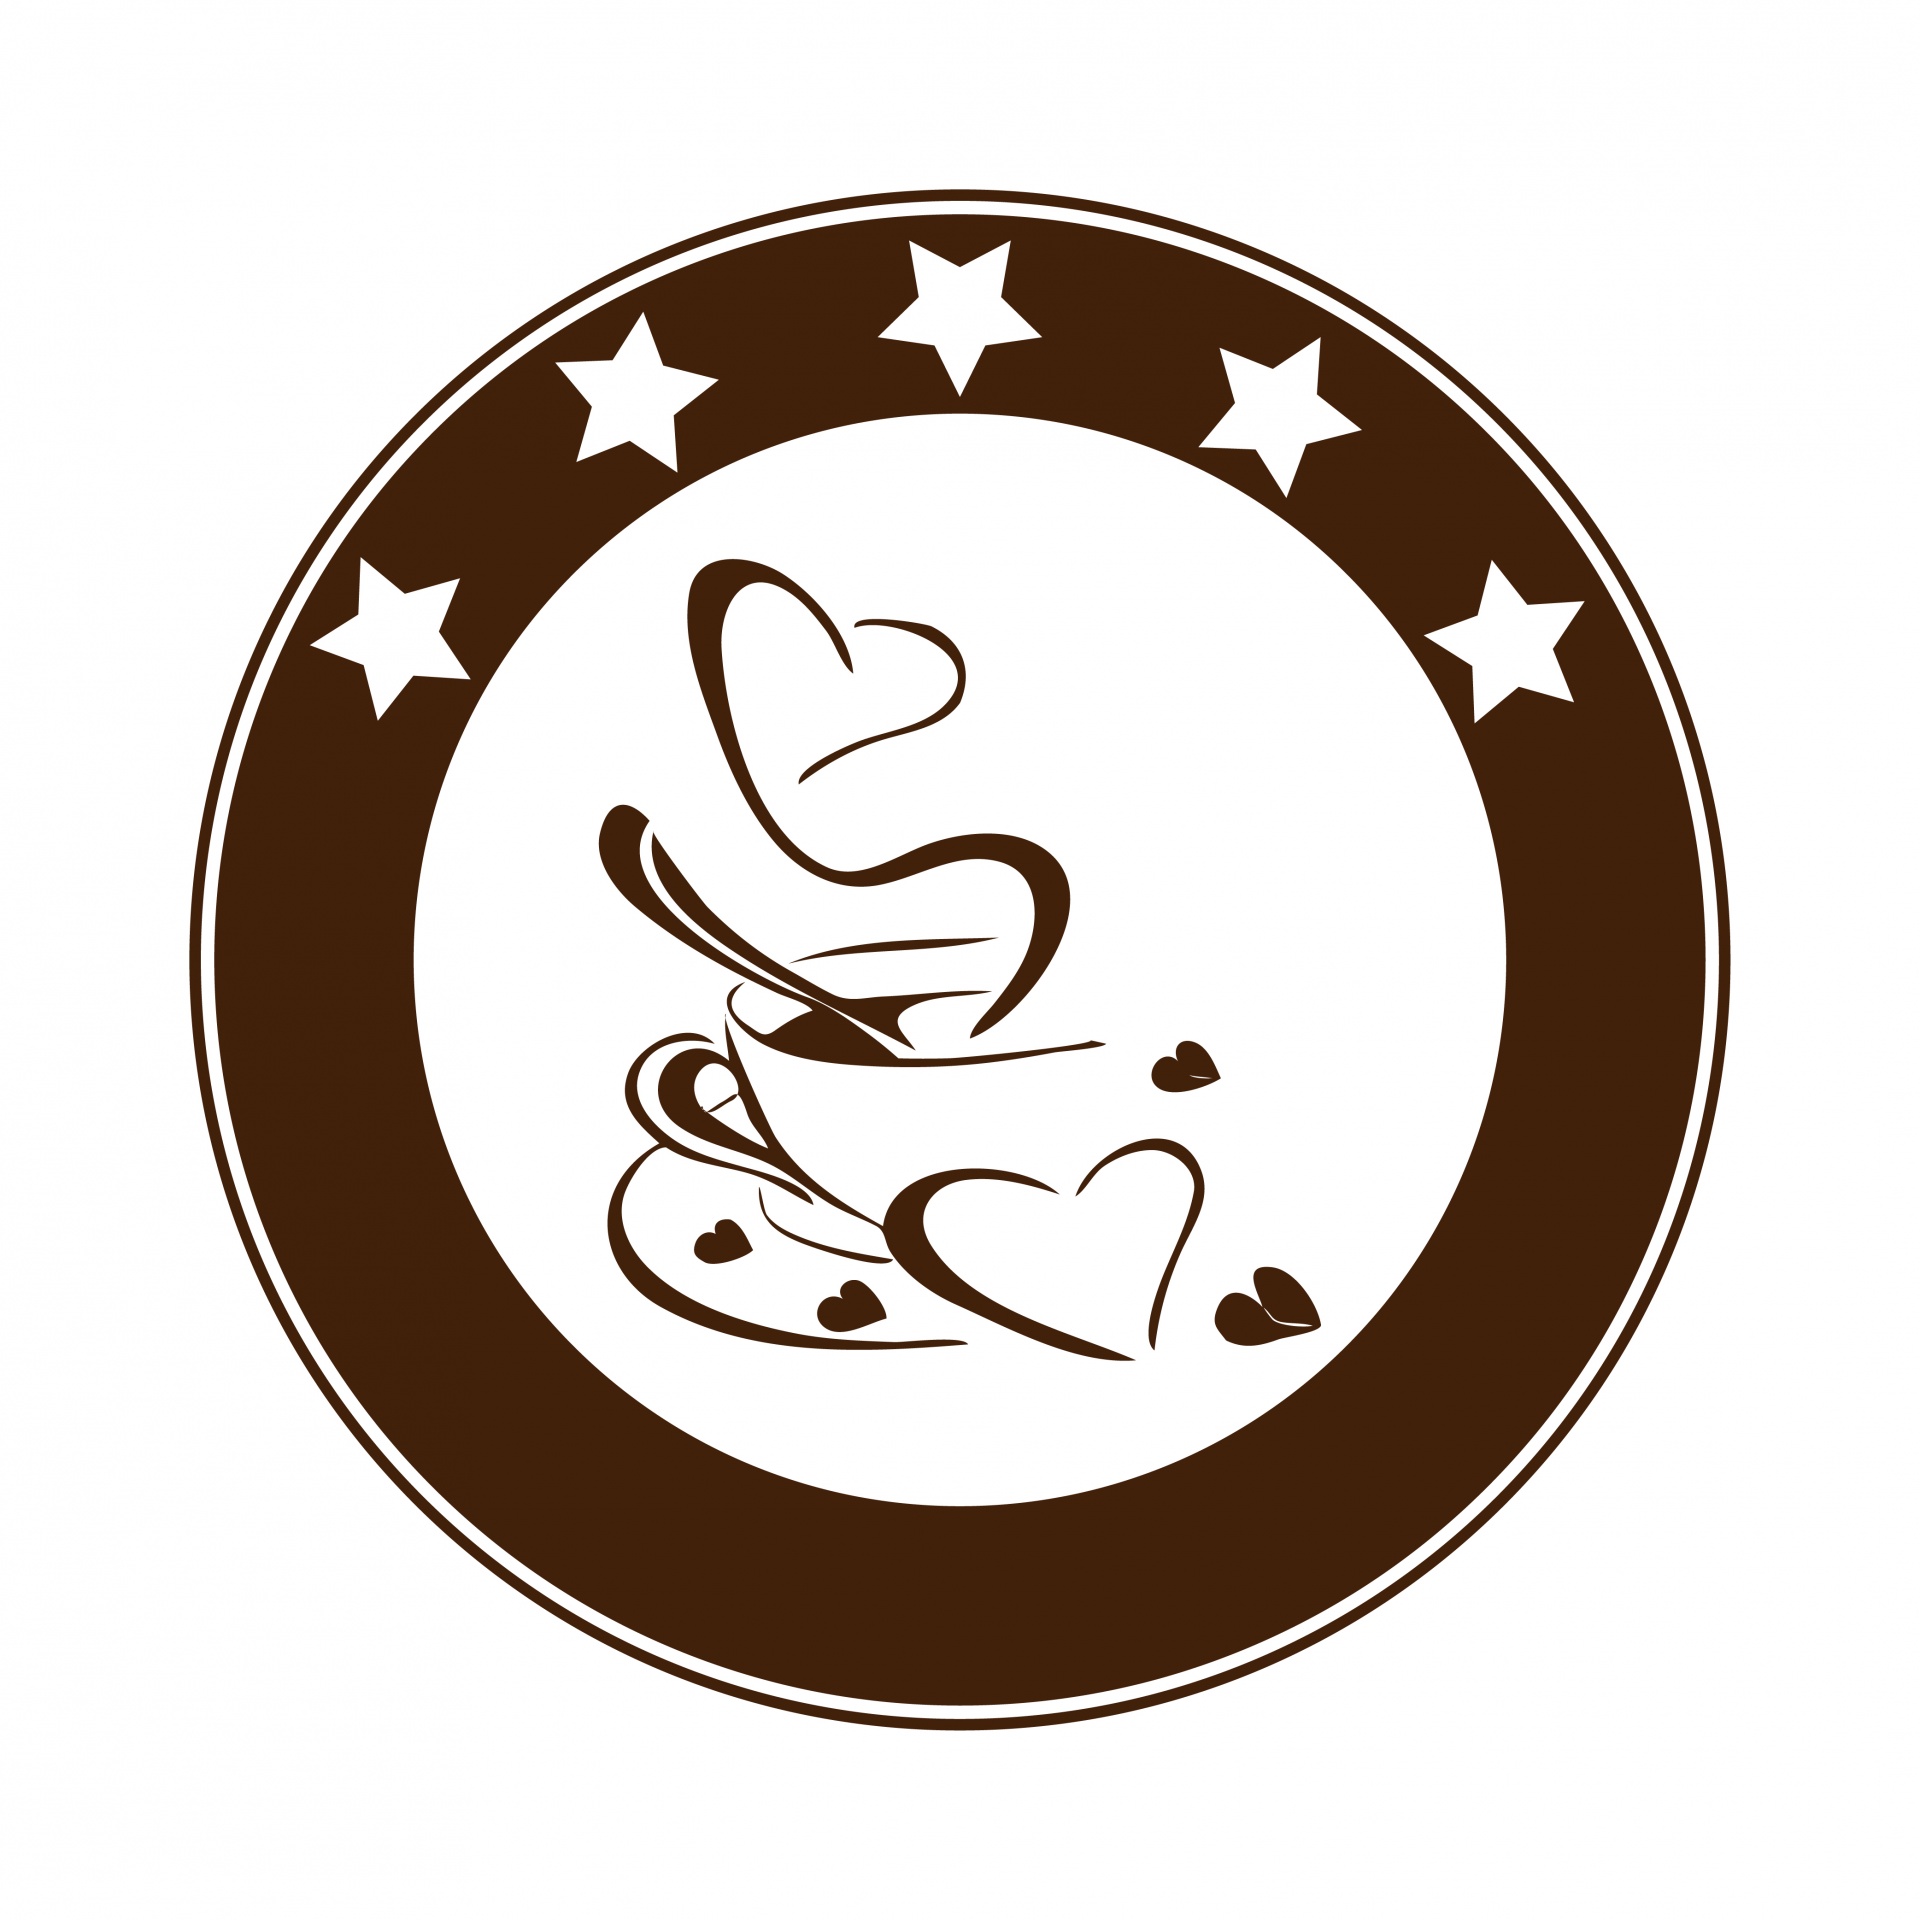 Brown and white coffee logo with cup and hearts on white background